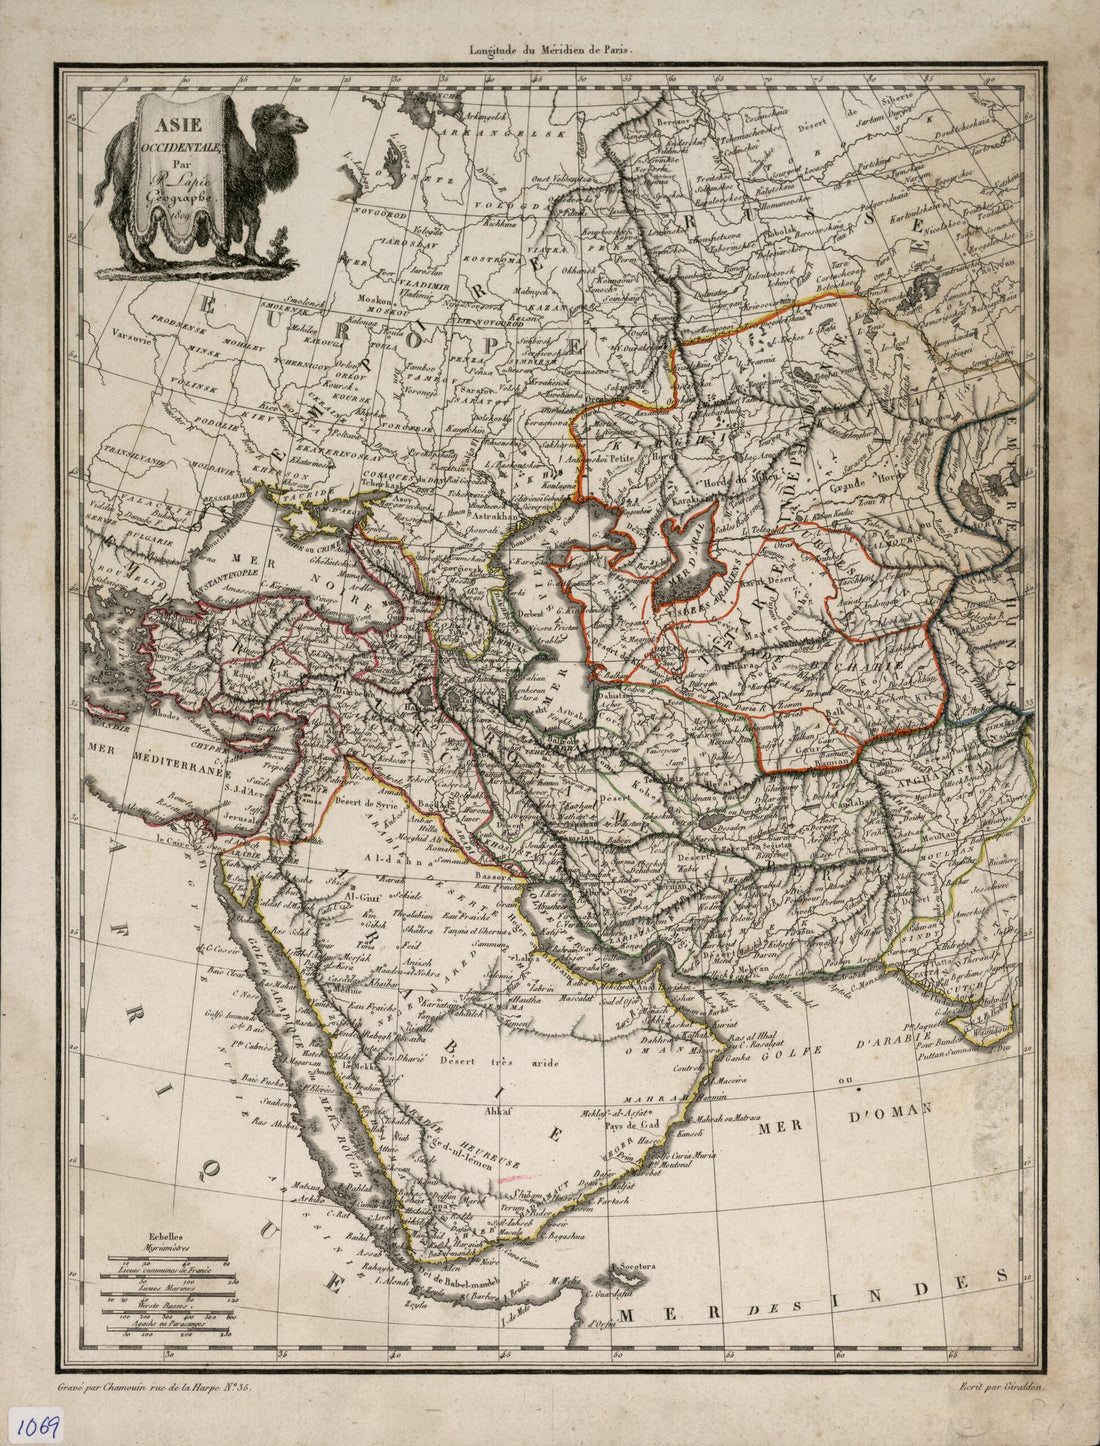 This old map of Western Asia. (Asie Occidentale) from 1809 was created by Jean Baptiste Marie Chamouin, Mrs Diot, Flourished Bovinet, M. (Pierre) Lapie, Conrad Brun,  19th Century in 1809